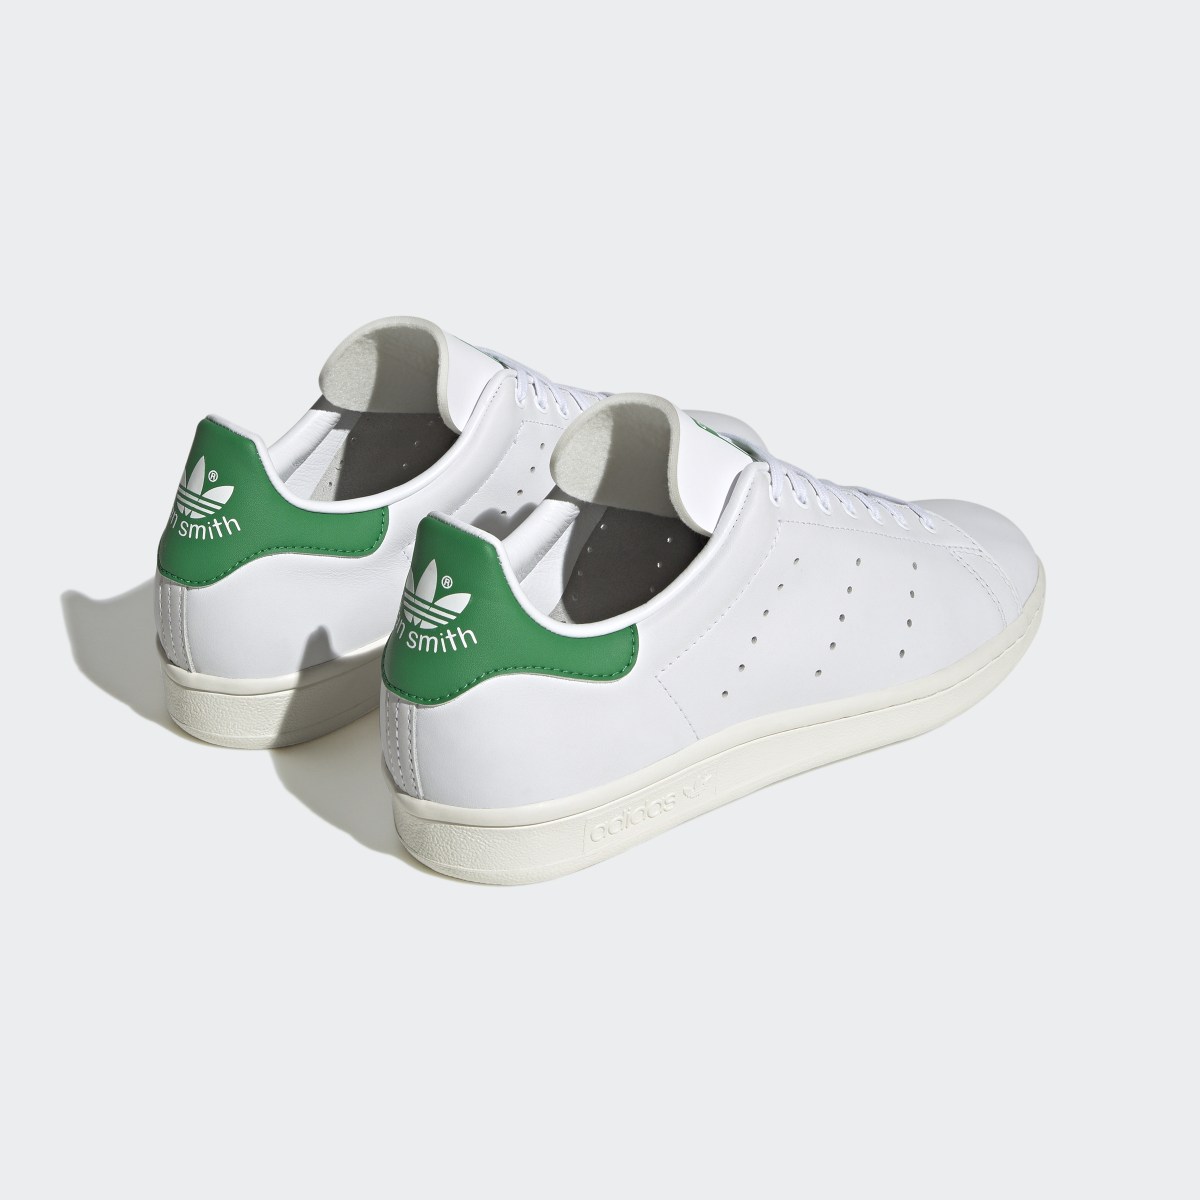 Adidas Stan Smith 80s Shoes. 6